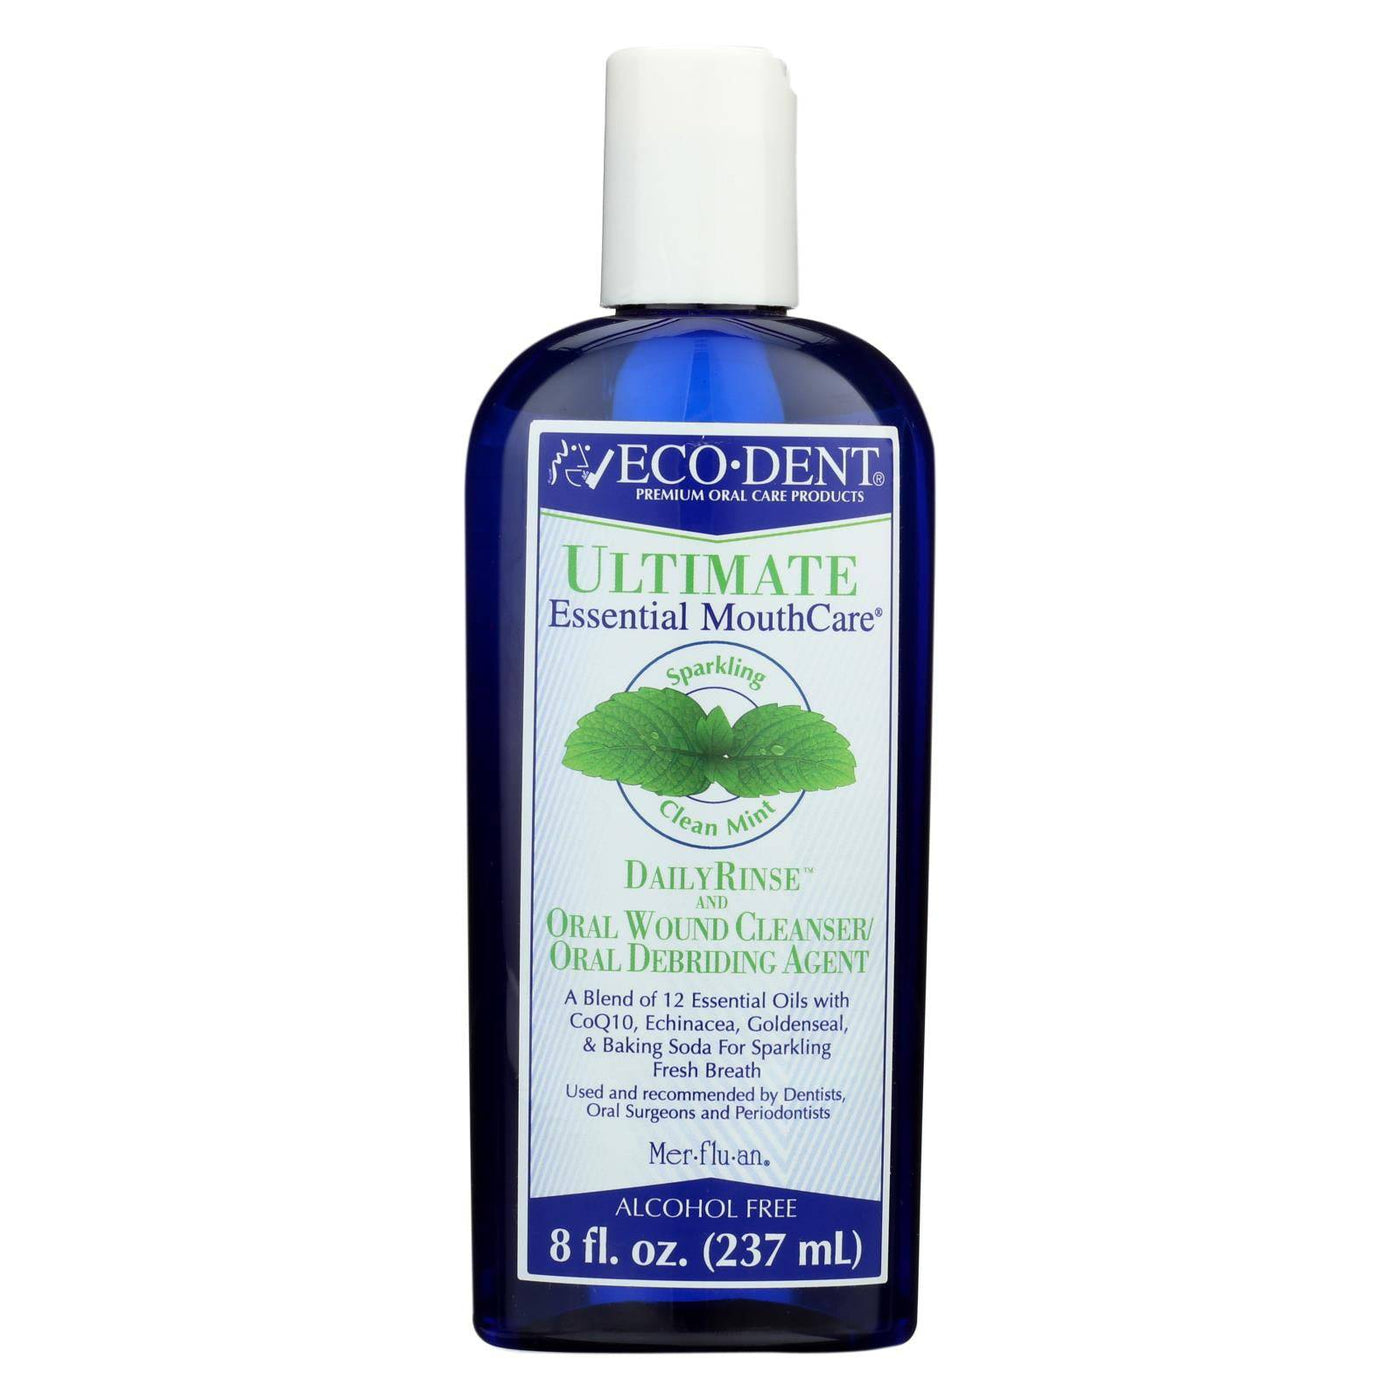 Buy Eco-dent Dailyrinse Mouthrinse - Mint - 8 Oz  at OnlyNaturals.us